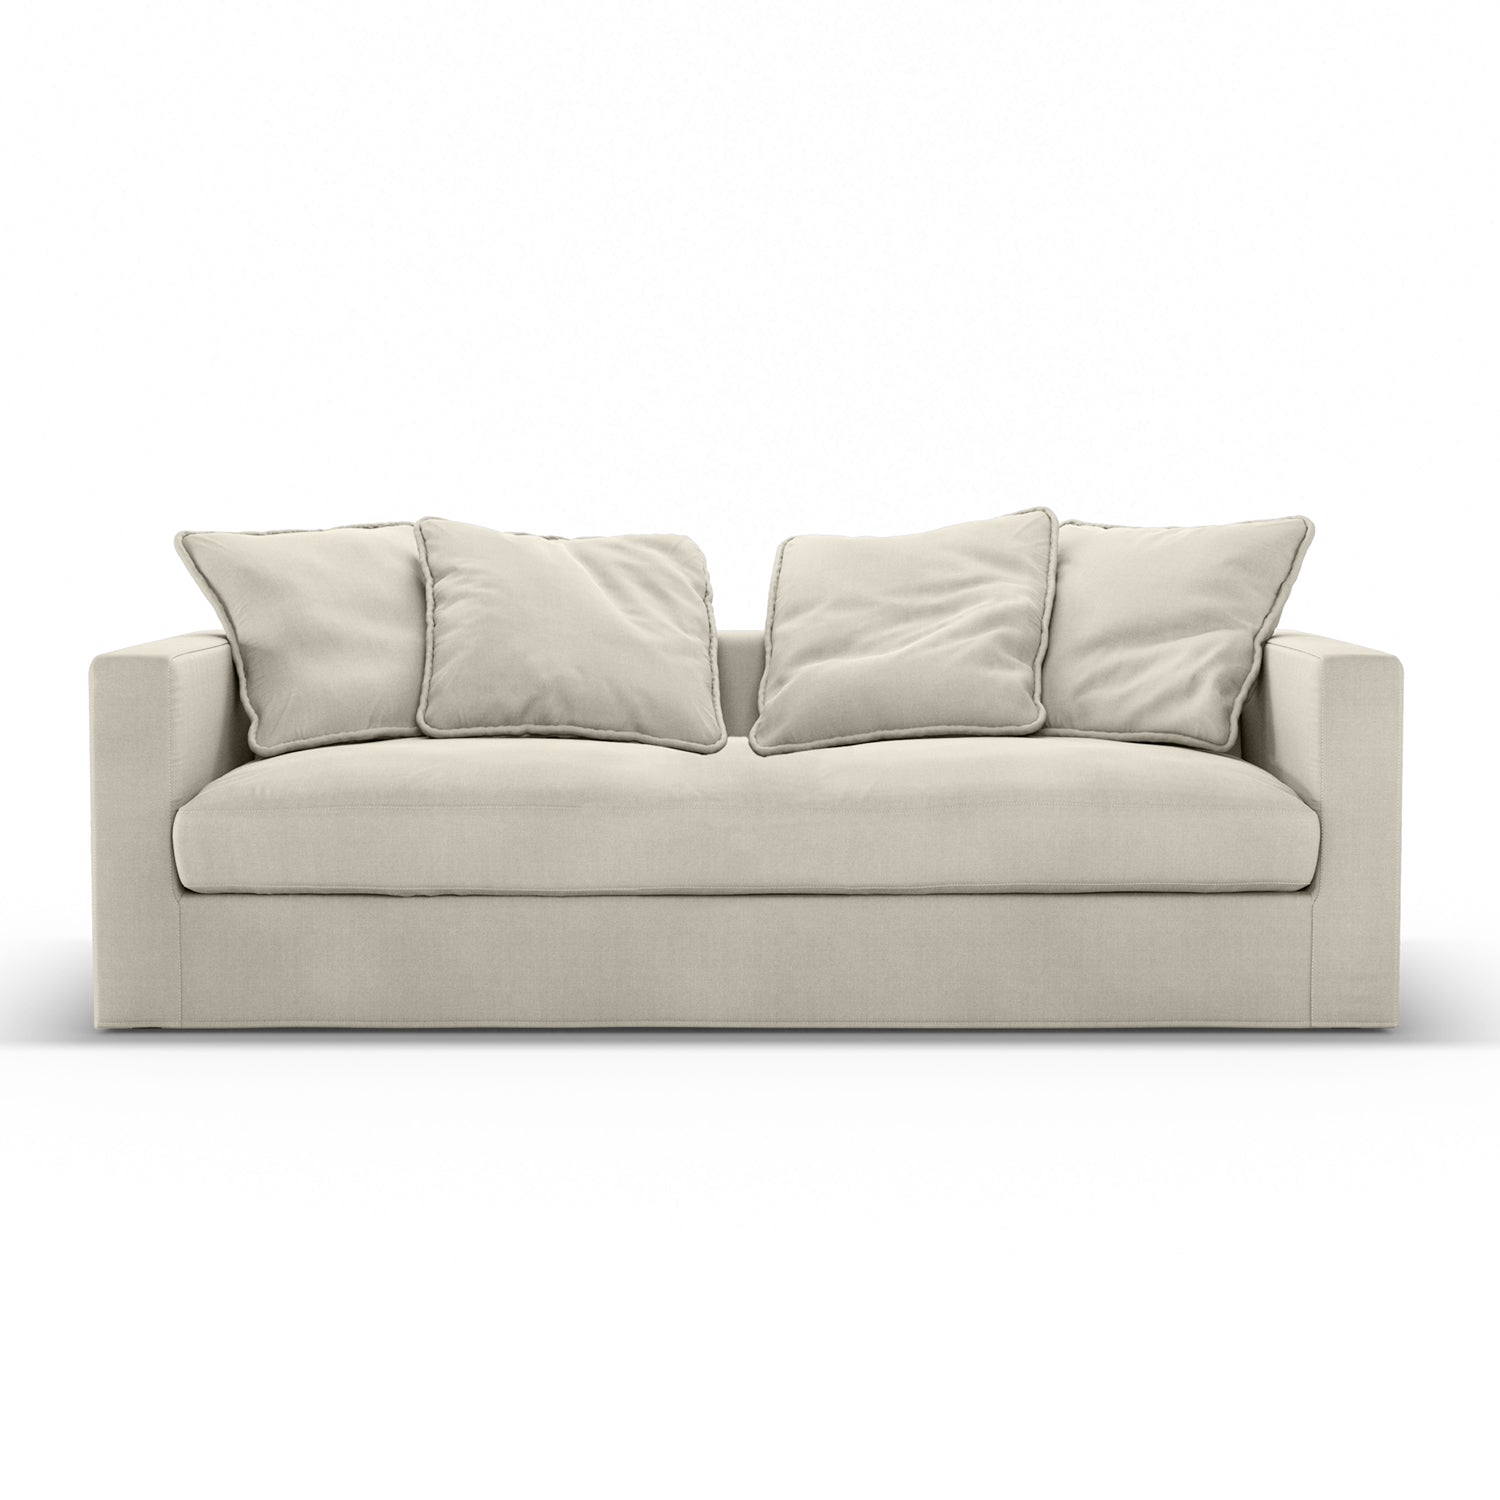 Elevated Home Sophistication, cream colored two seater sofa